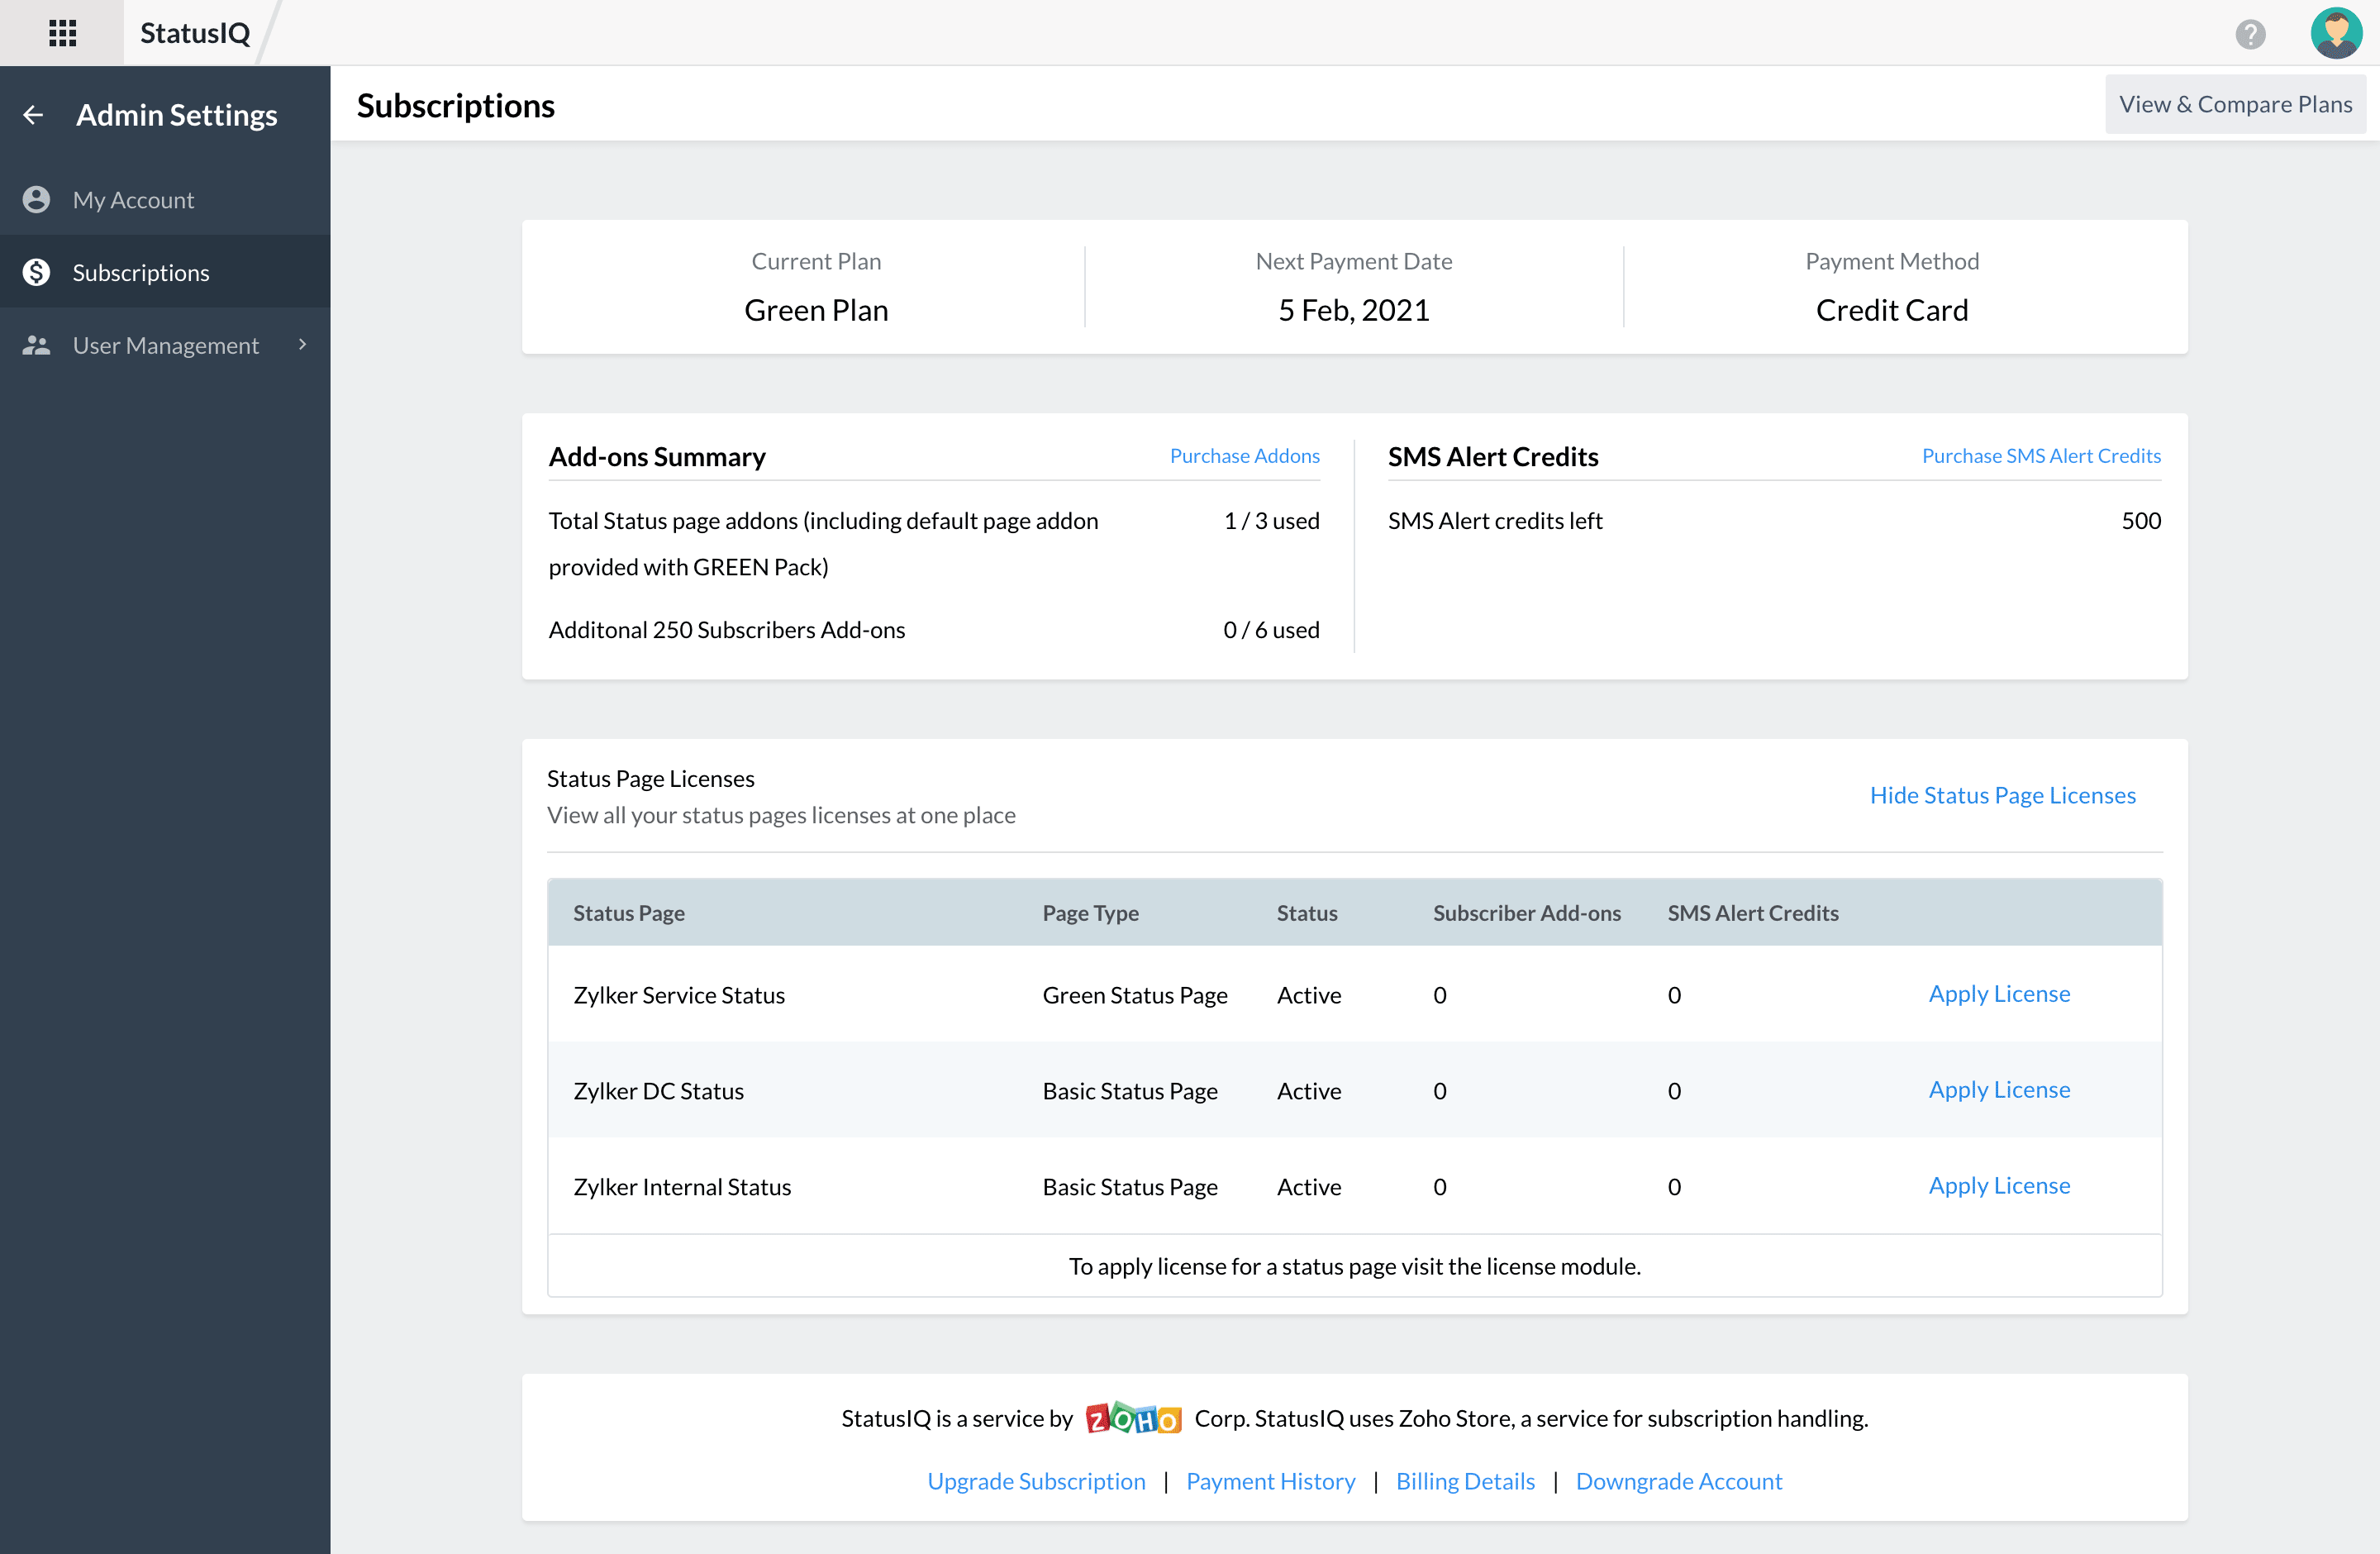 View your status page license summary